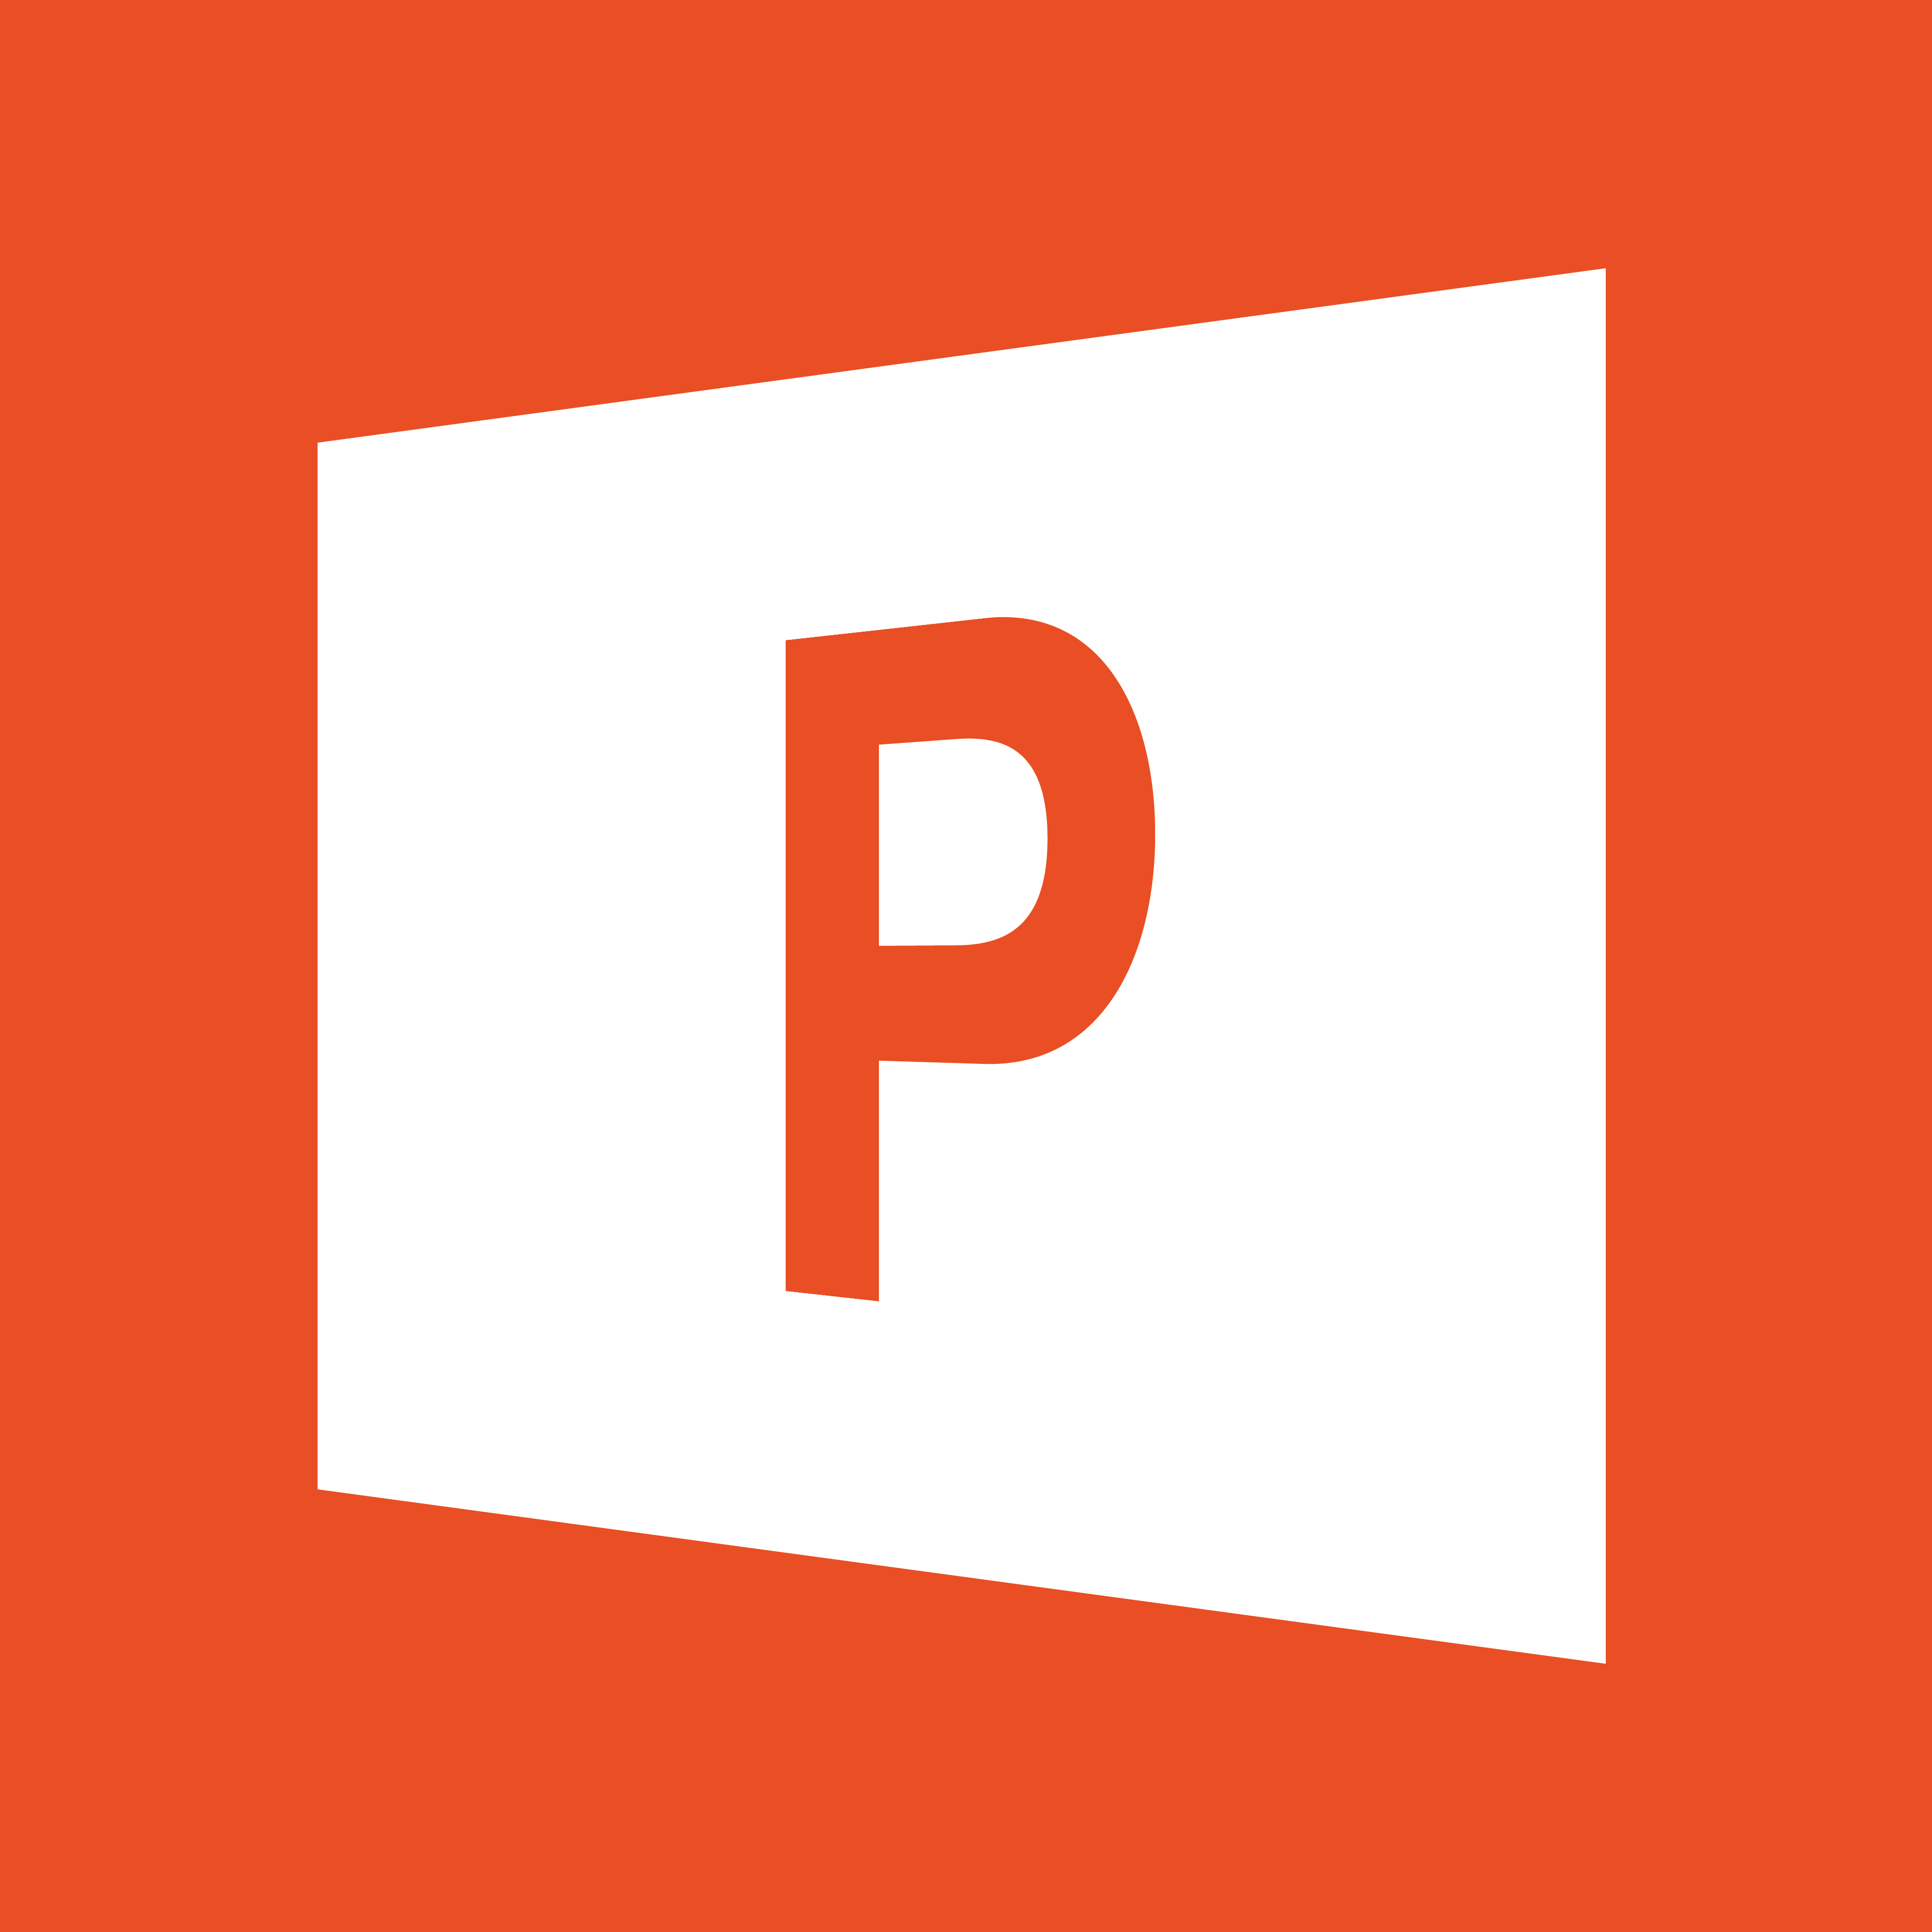 PowerPoint 2016 Logo - Microsoft powerpoint logo 2016 png » PNG Image